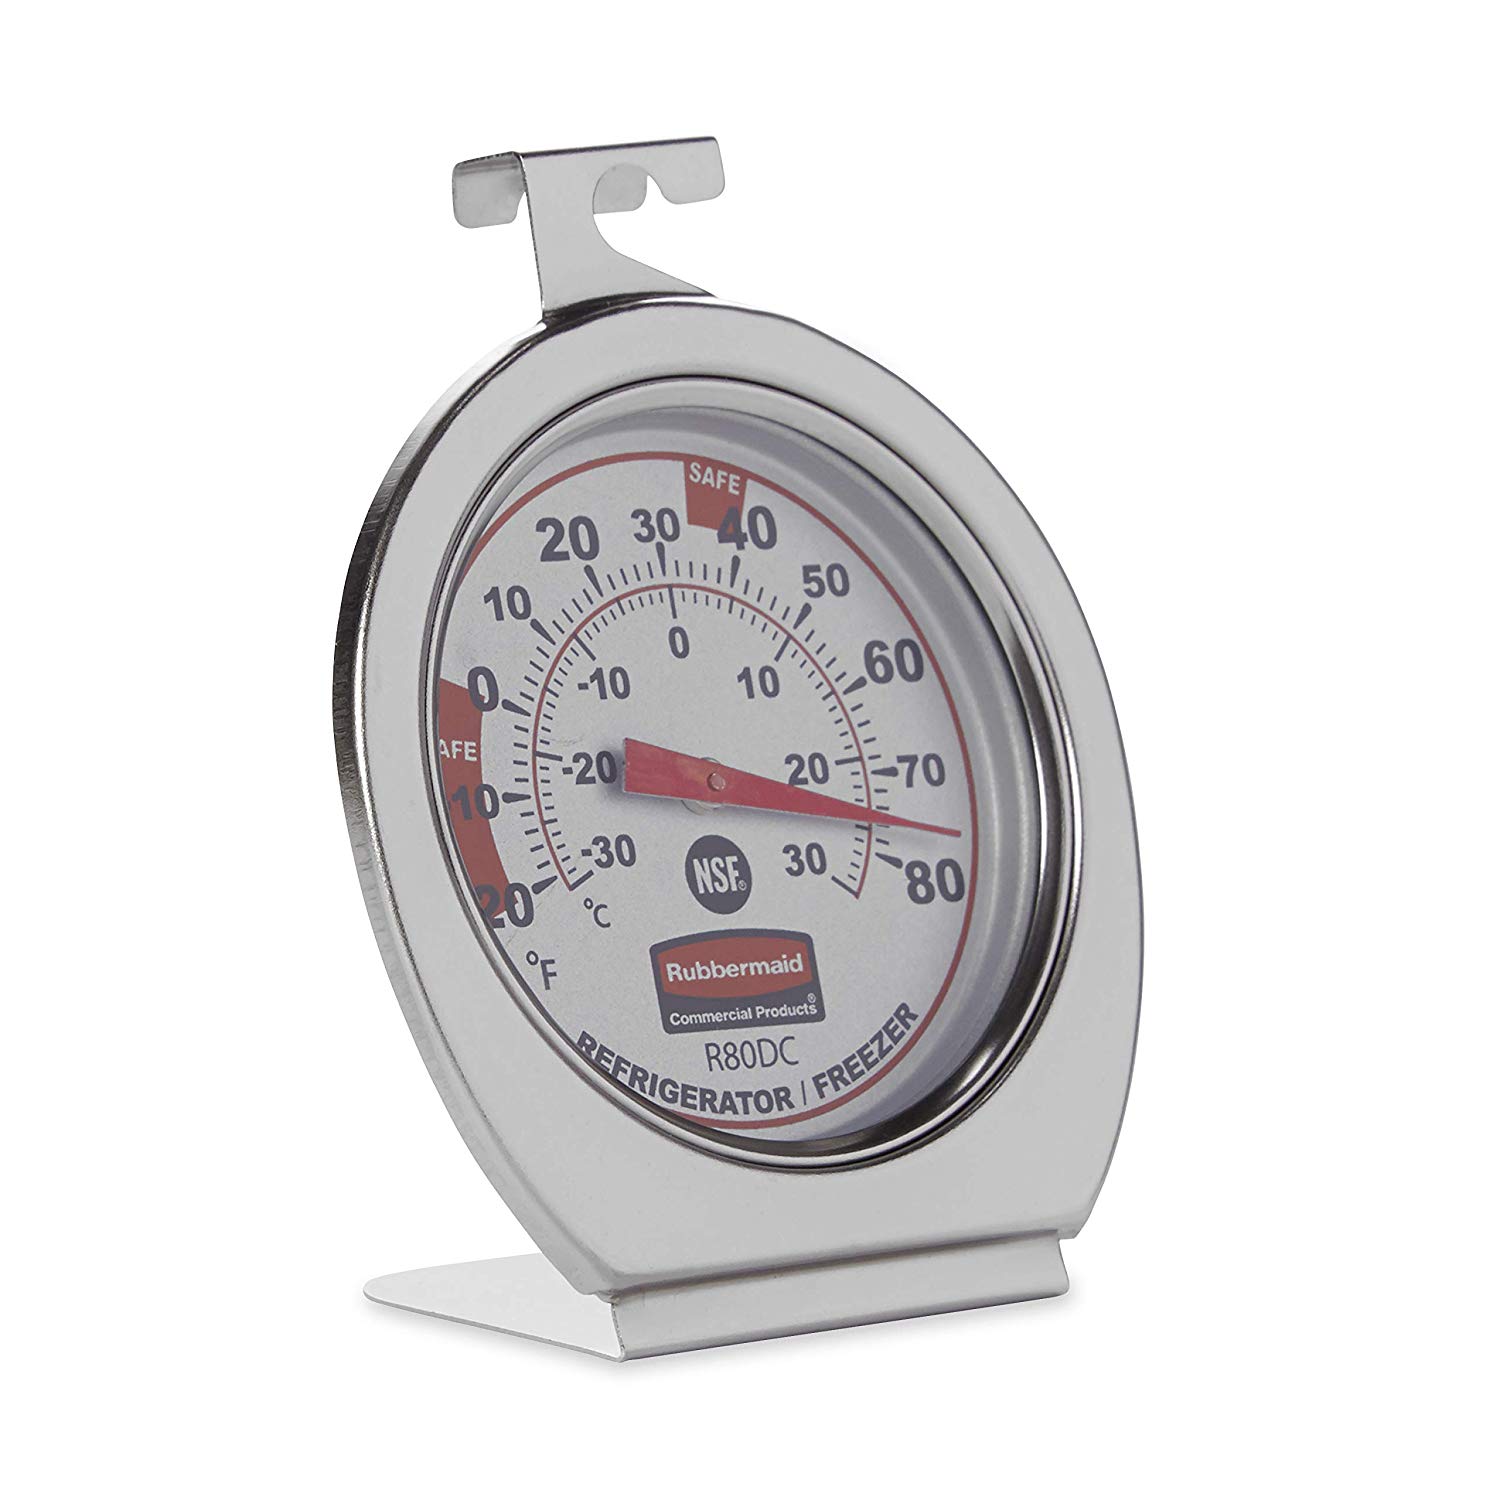 Rubbermaid Commercial Waterproof Chrome Refrigerator Thermometer